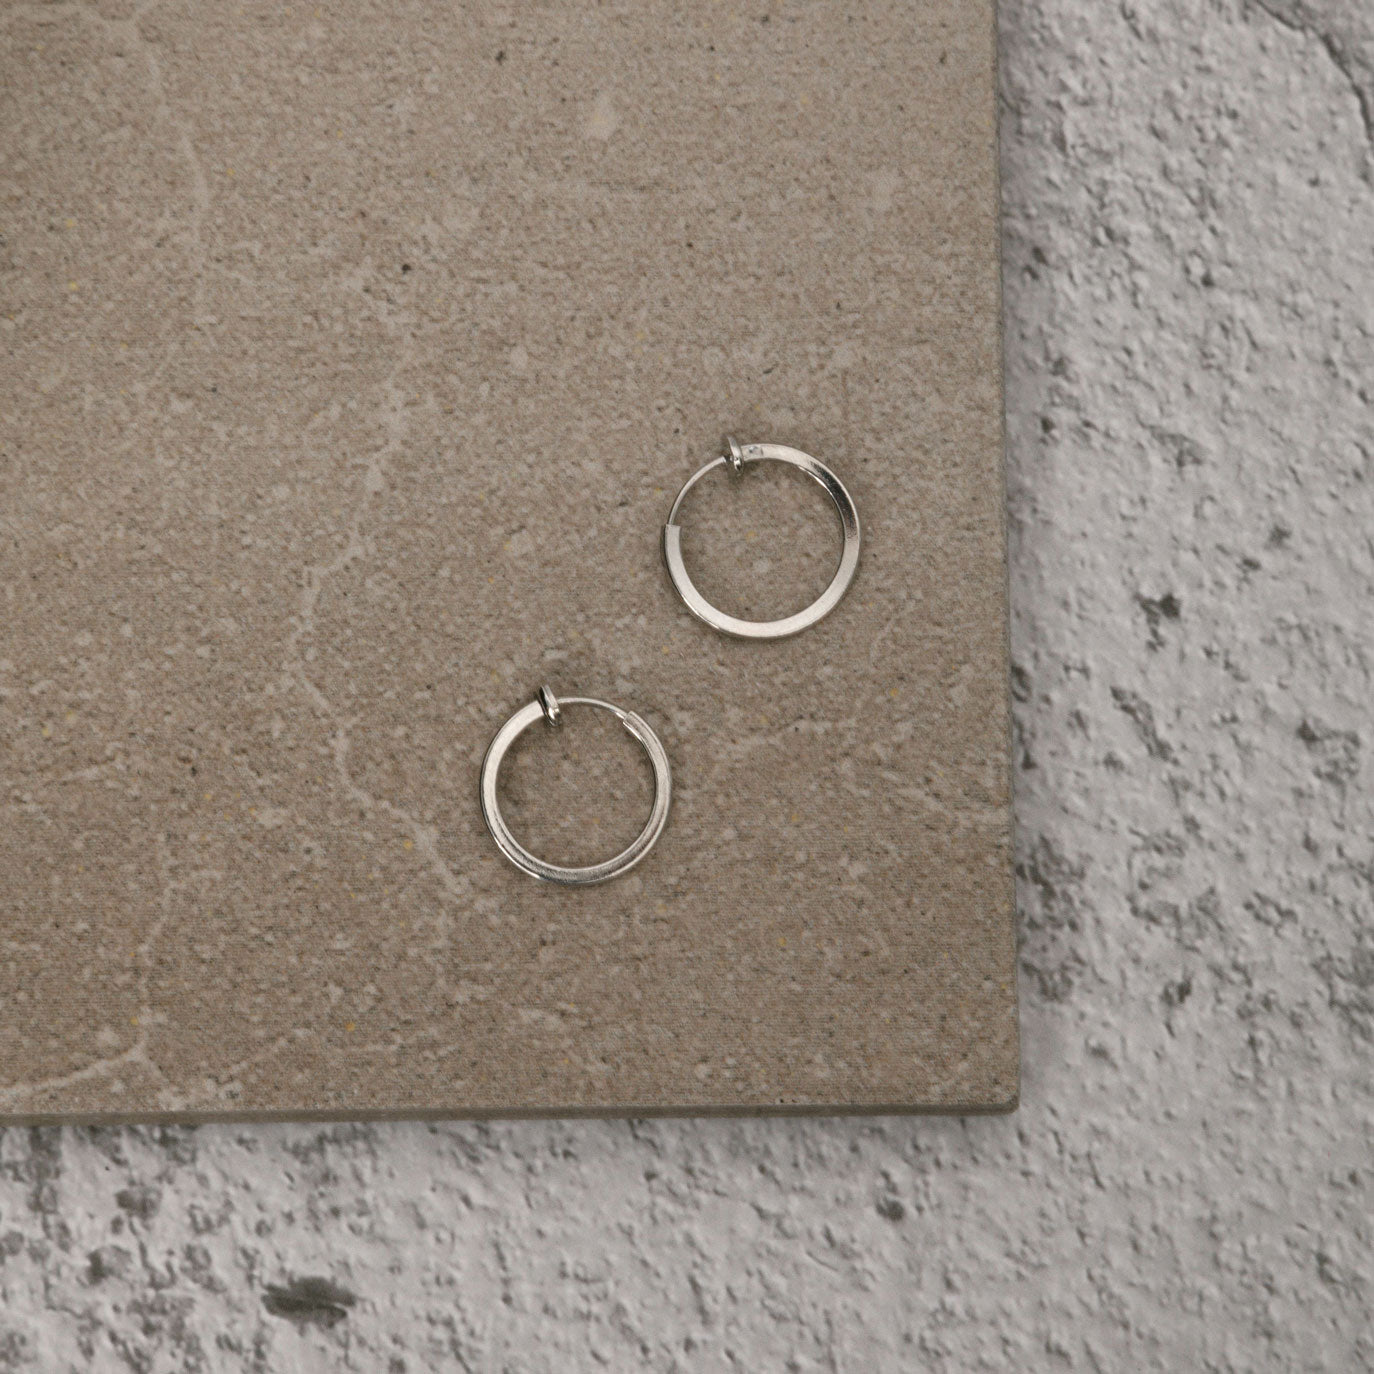 Image of the Classic Hoop Clip On Earrings feature a sliding spring closure that is ideal for small or thin ear lobes. The secure hold enables comfortable wear up to 4 hours, and the design automatically adjusts to the thickness of the ear. Crafted from stainless steel, the earrings come as a single pair.